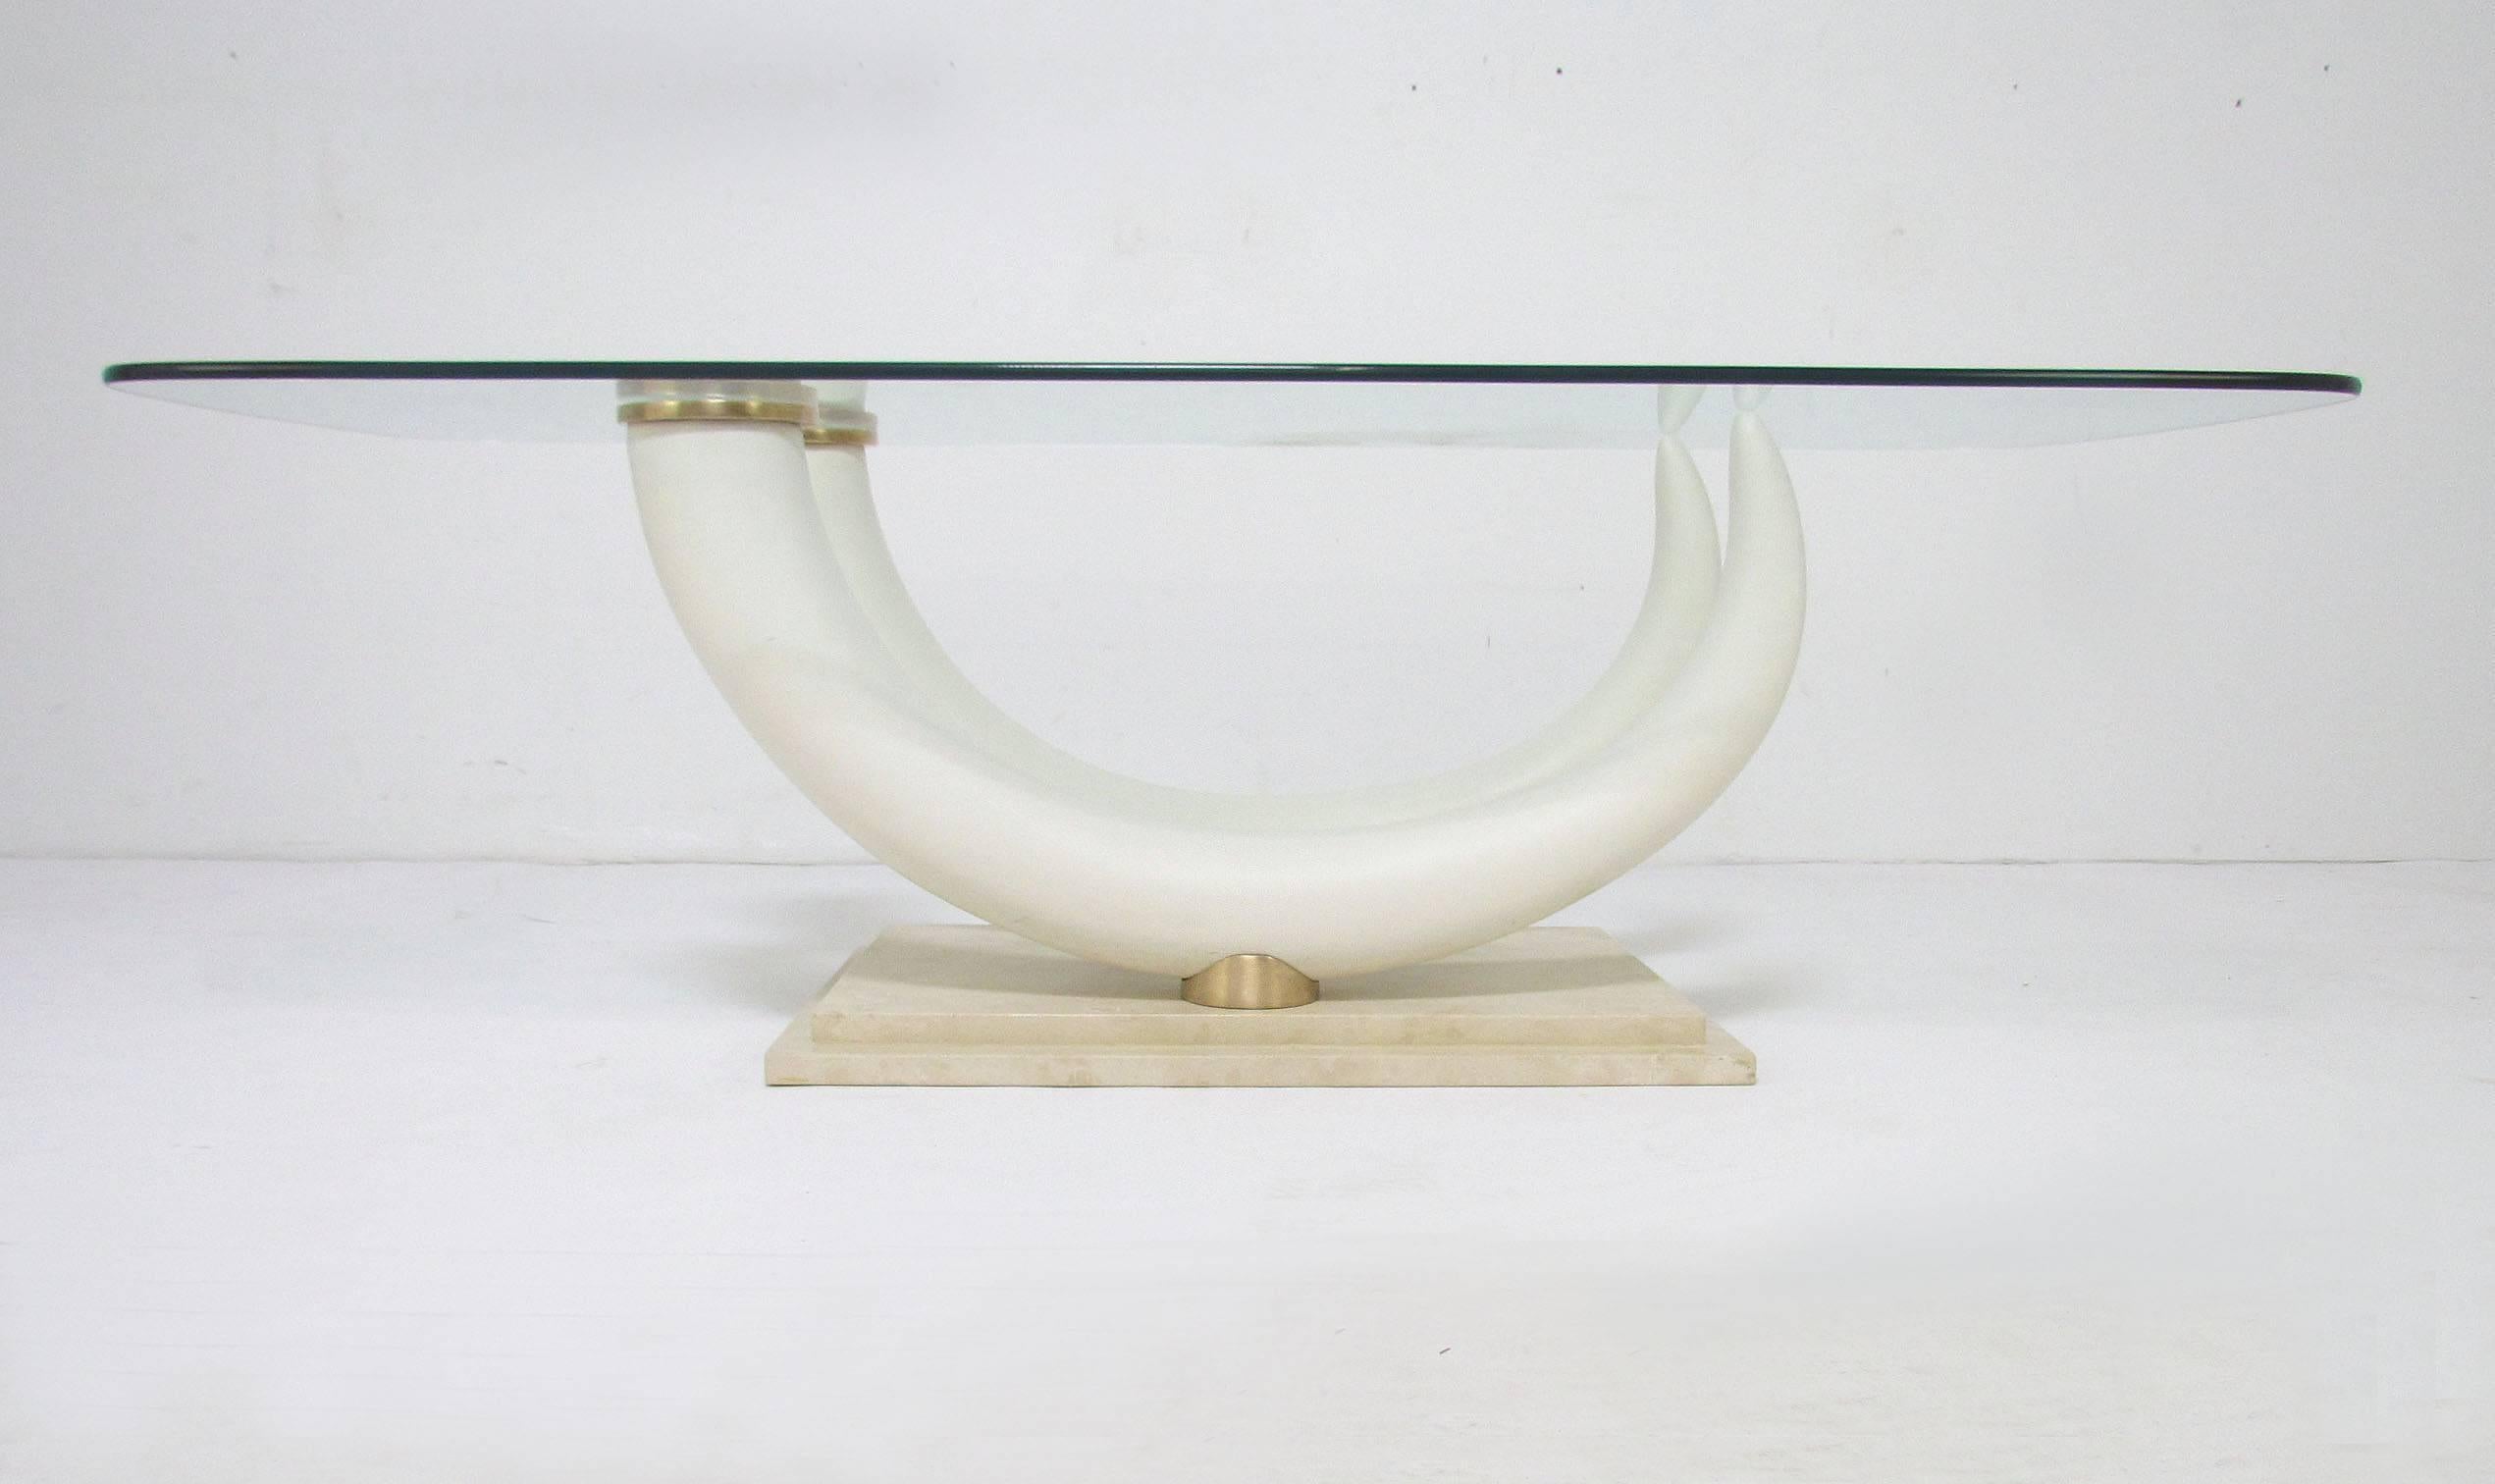 Faux elephant tusk coffee table with brass elements and a travertine base, circa 1970s, by Maison Jansen, made in Italy.